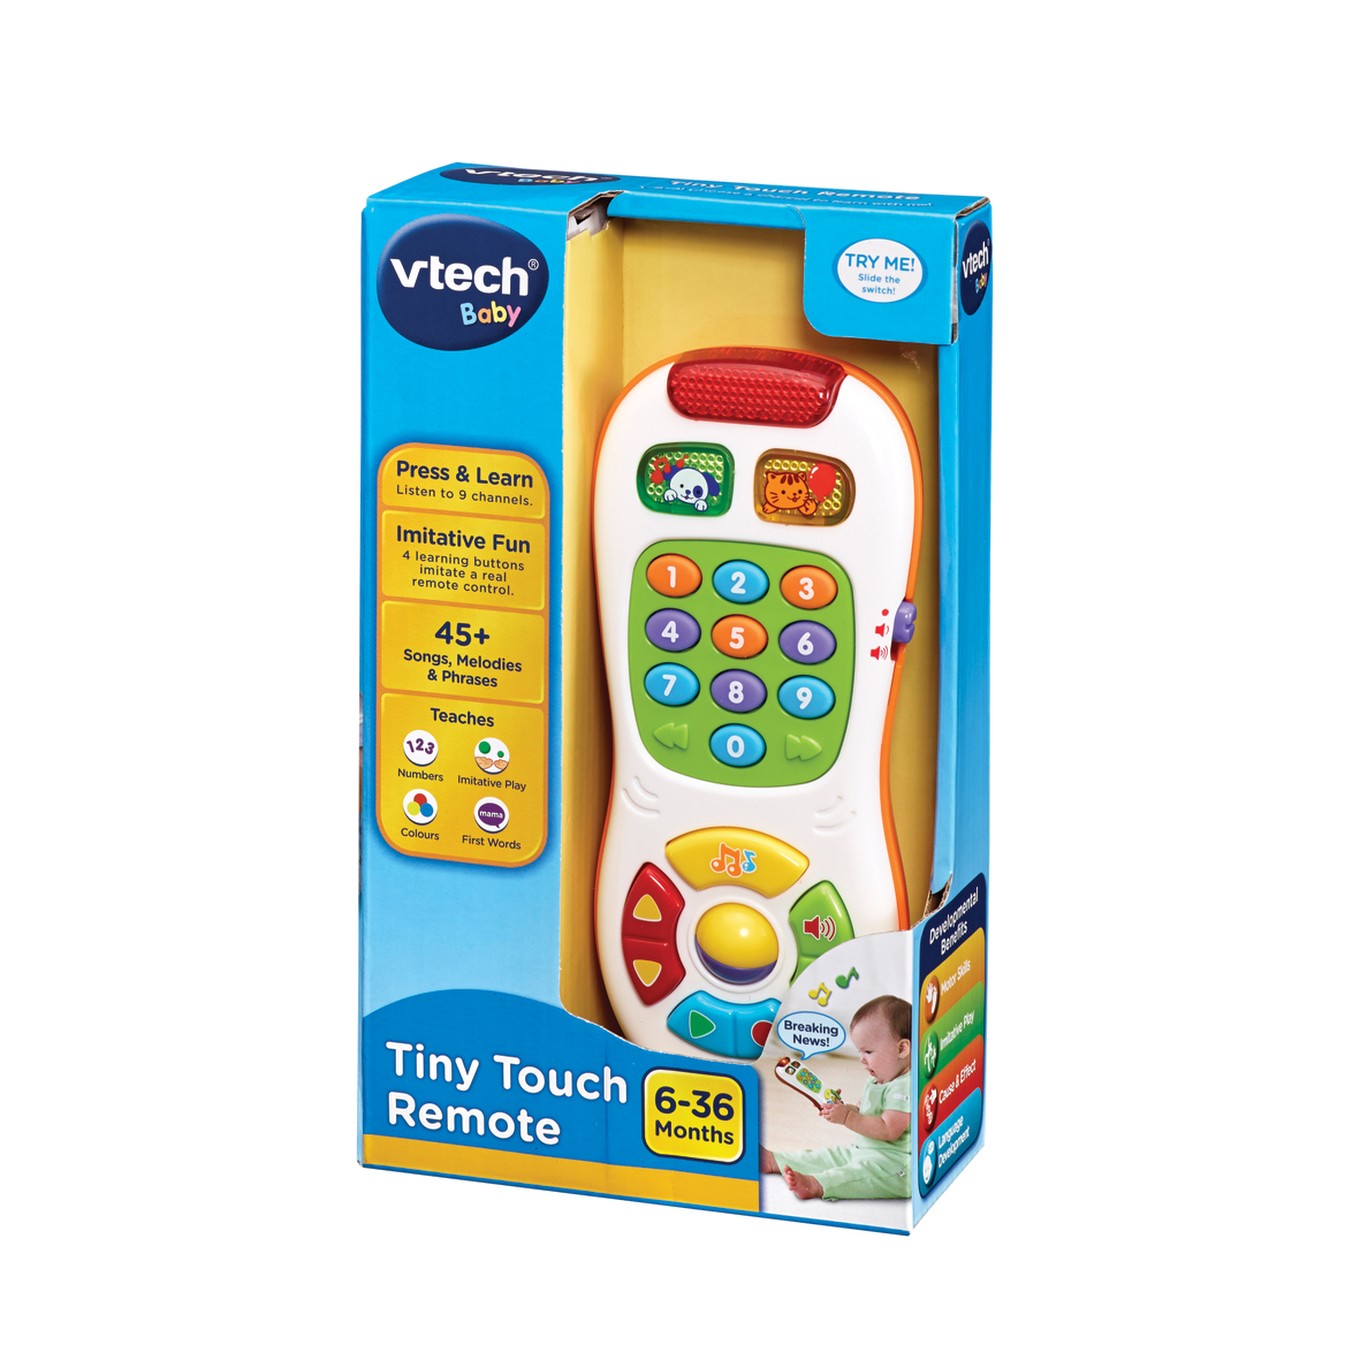 TINY TOUCH REMOTE